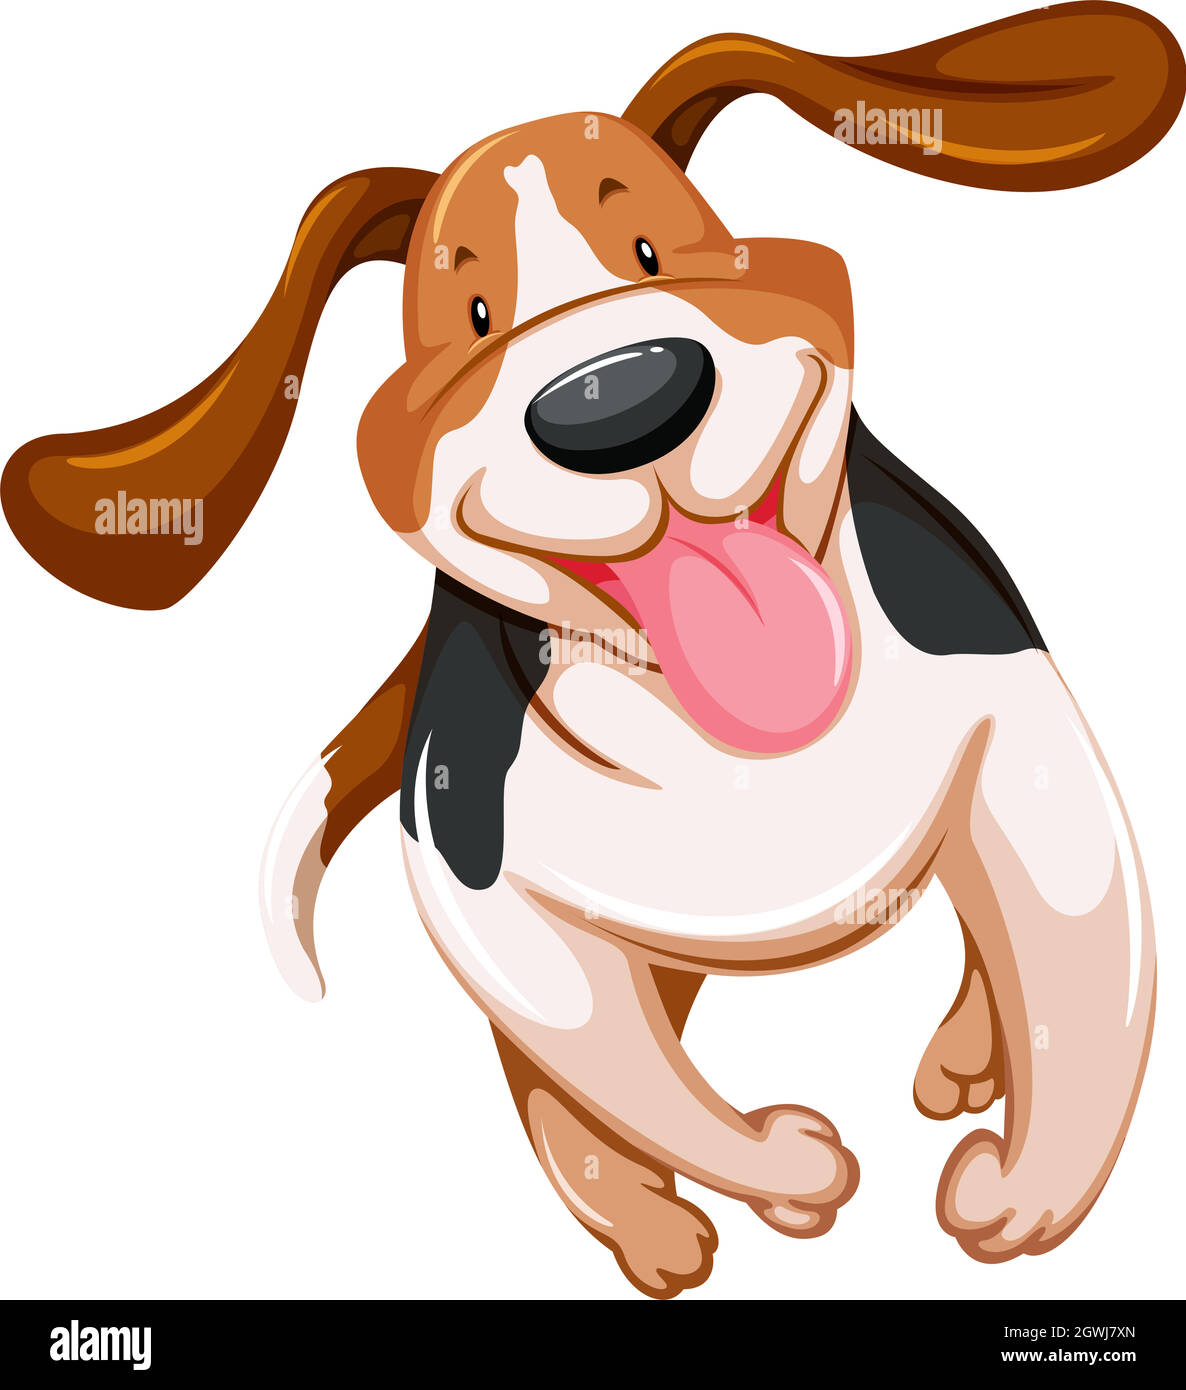 Playful puppy Stock Vector